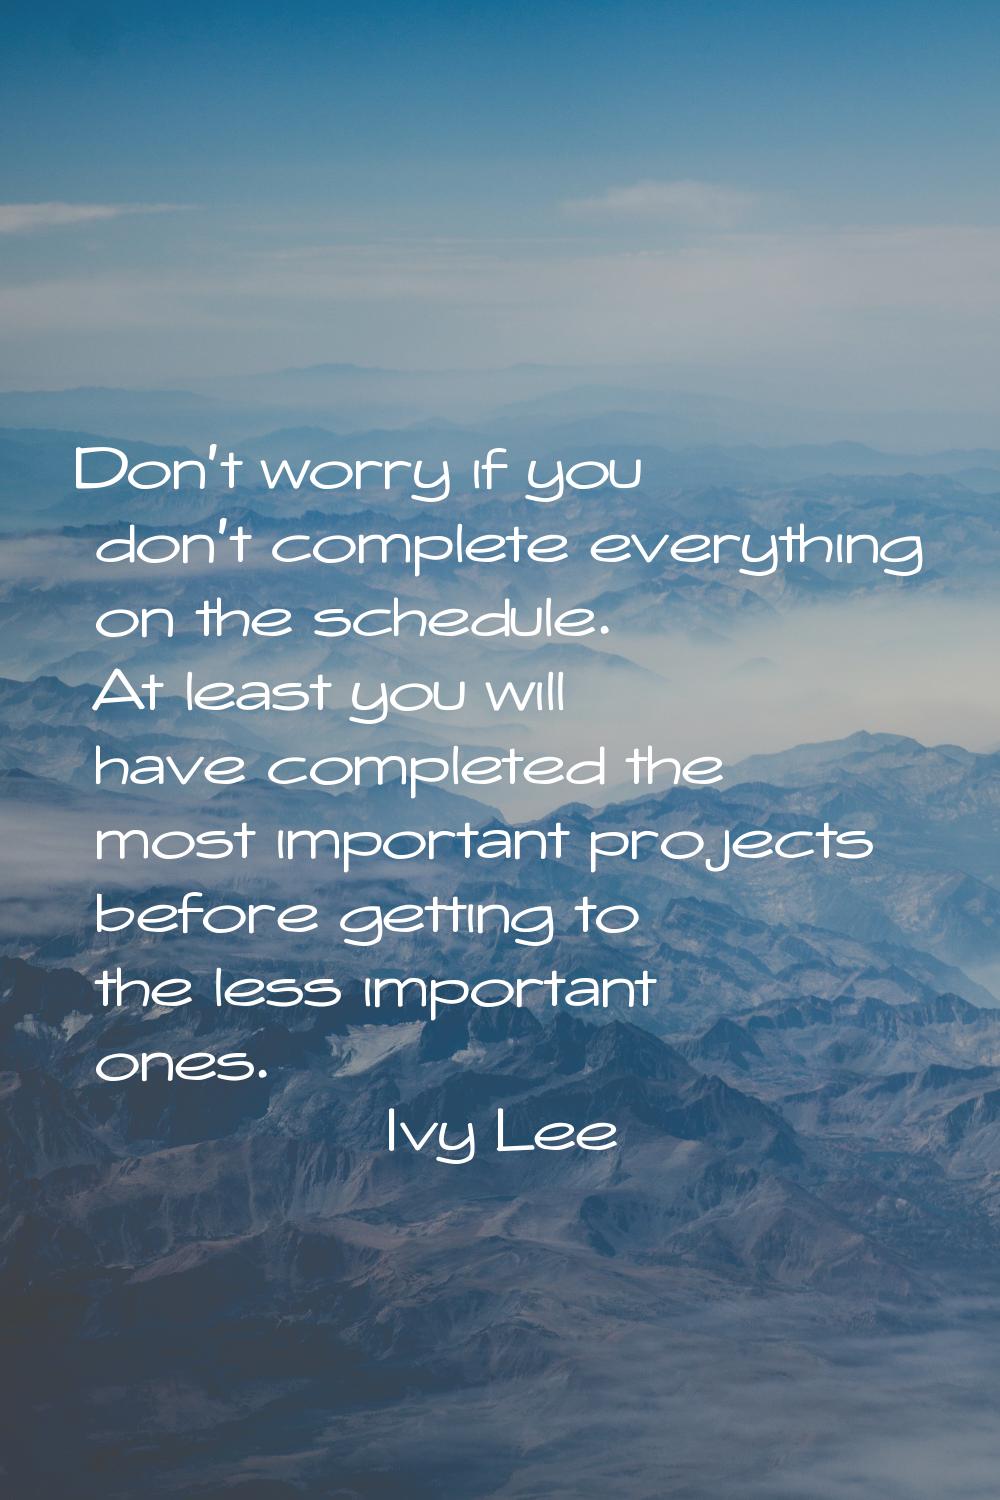 Don't worry if you don't complete everything on the schedule. At least you will have completed the 